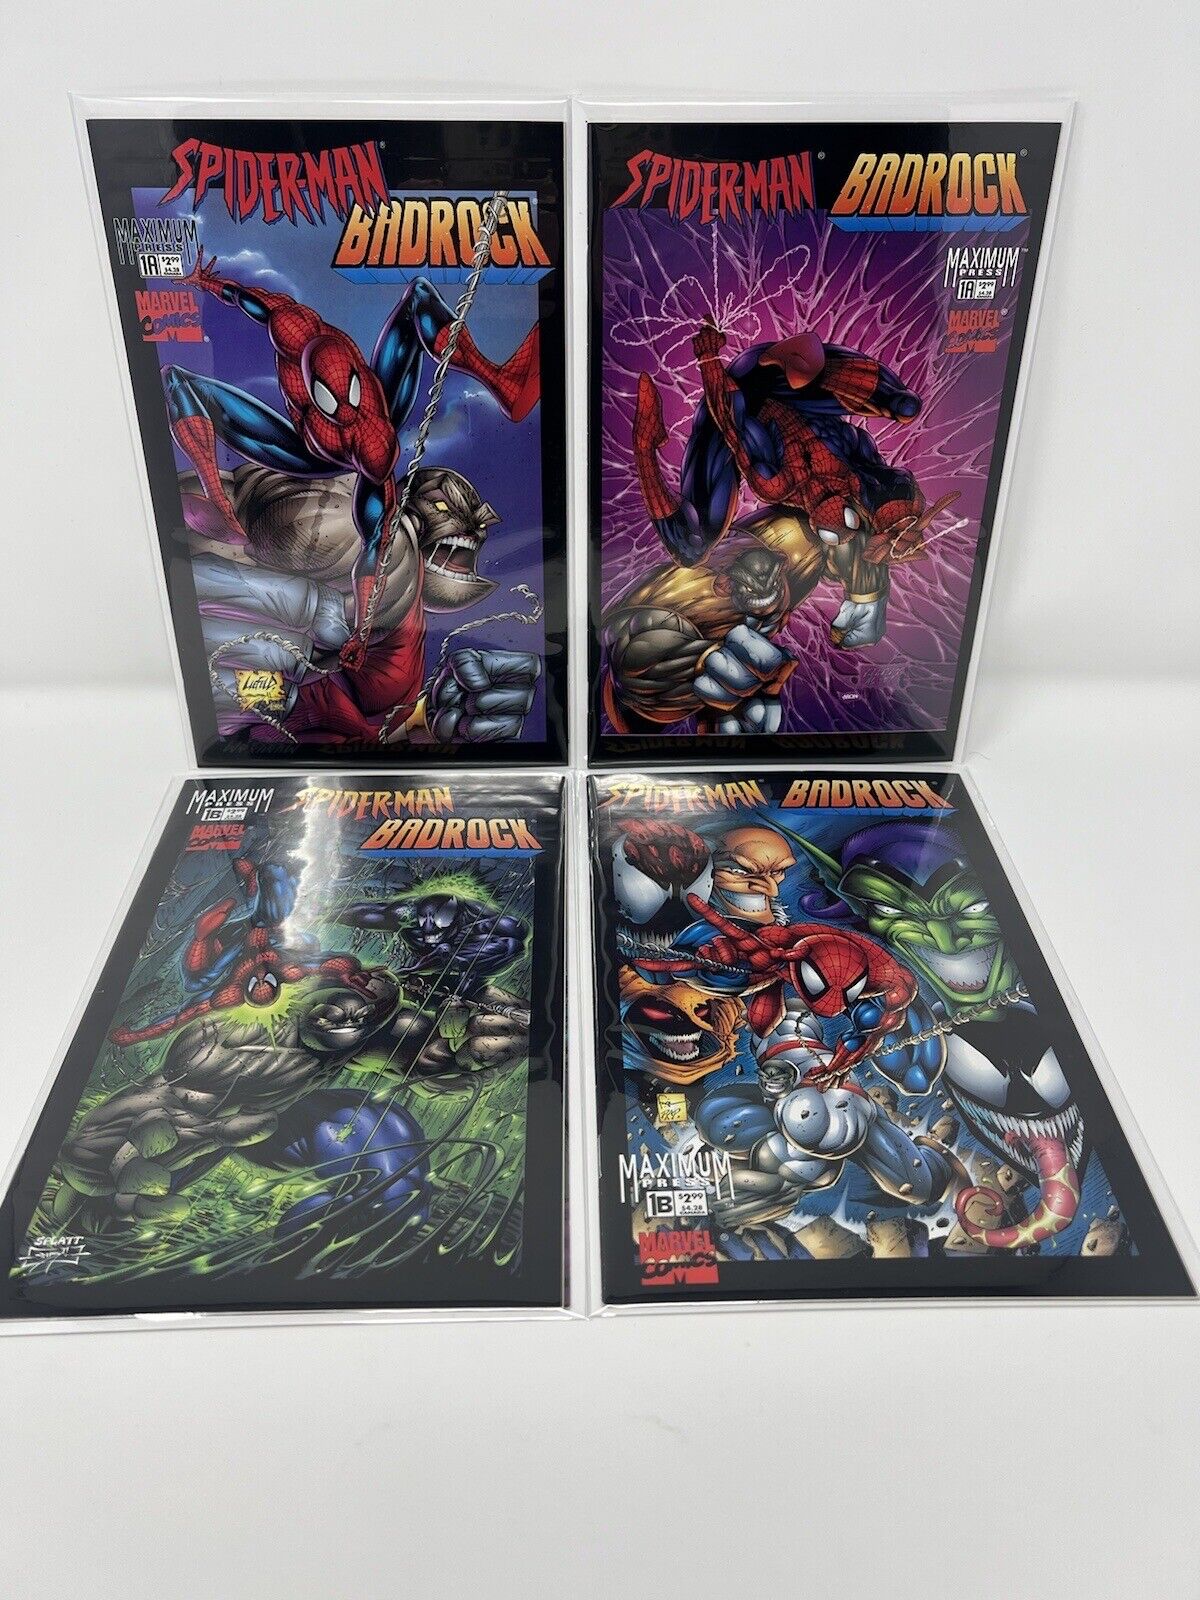 Spider-Man Badrock 1A with Alternate Covers Comic Book Lot of 4 (1997, Marvel)